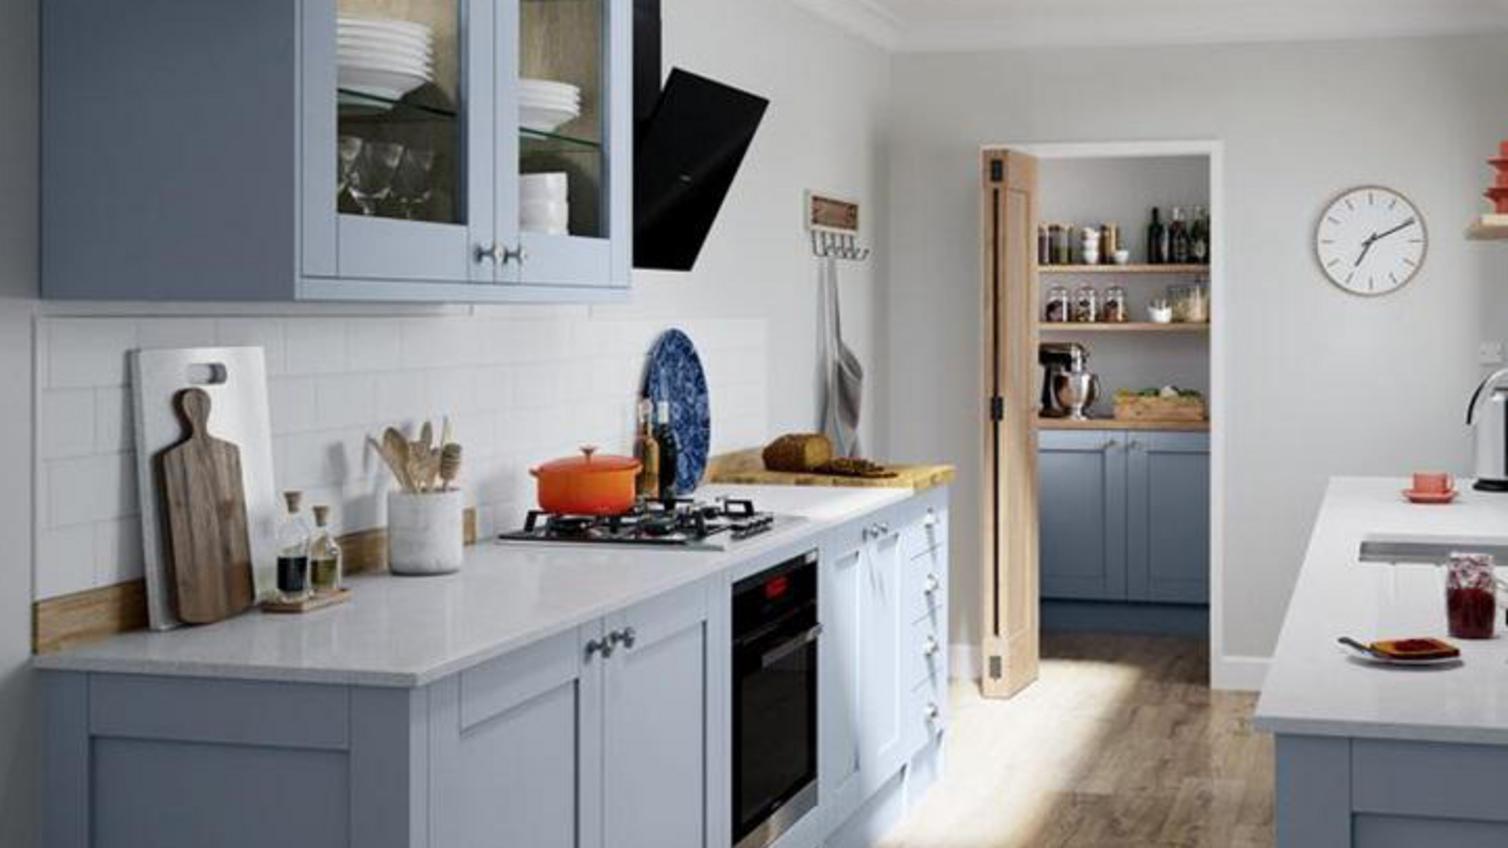 Small shaker kitchen in a galley layout, finished with a blue colour. Includes light worktop and glass wall cabinets.